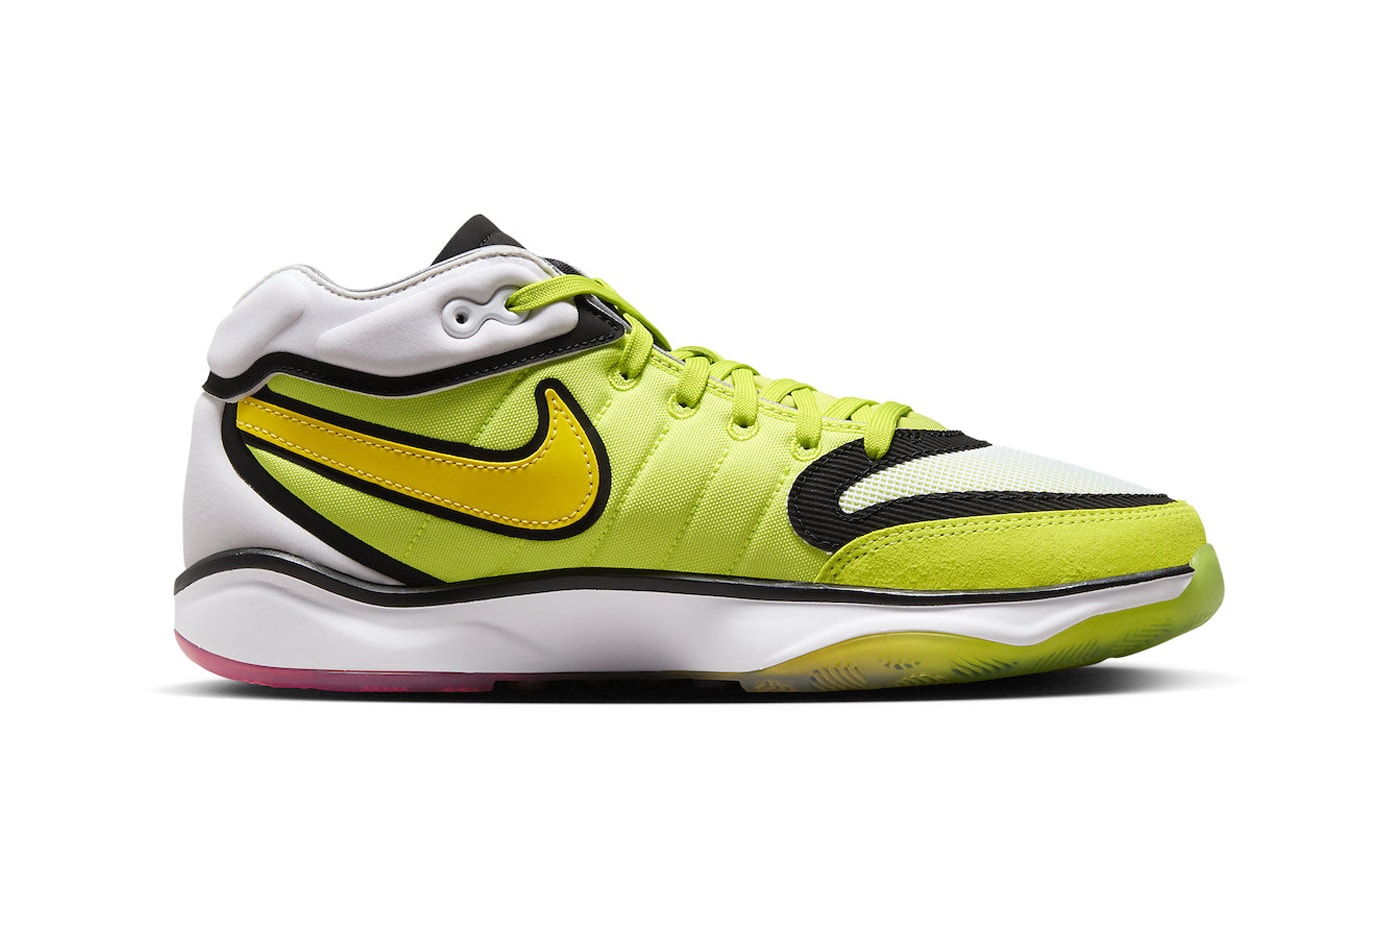 Official Look Nike Air Zoom Hustle 2 "Talaria" DJ9404-300 Cyber/Vivid Sulfur-White-Siren Red-Black fall 2023 gt run collection